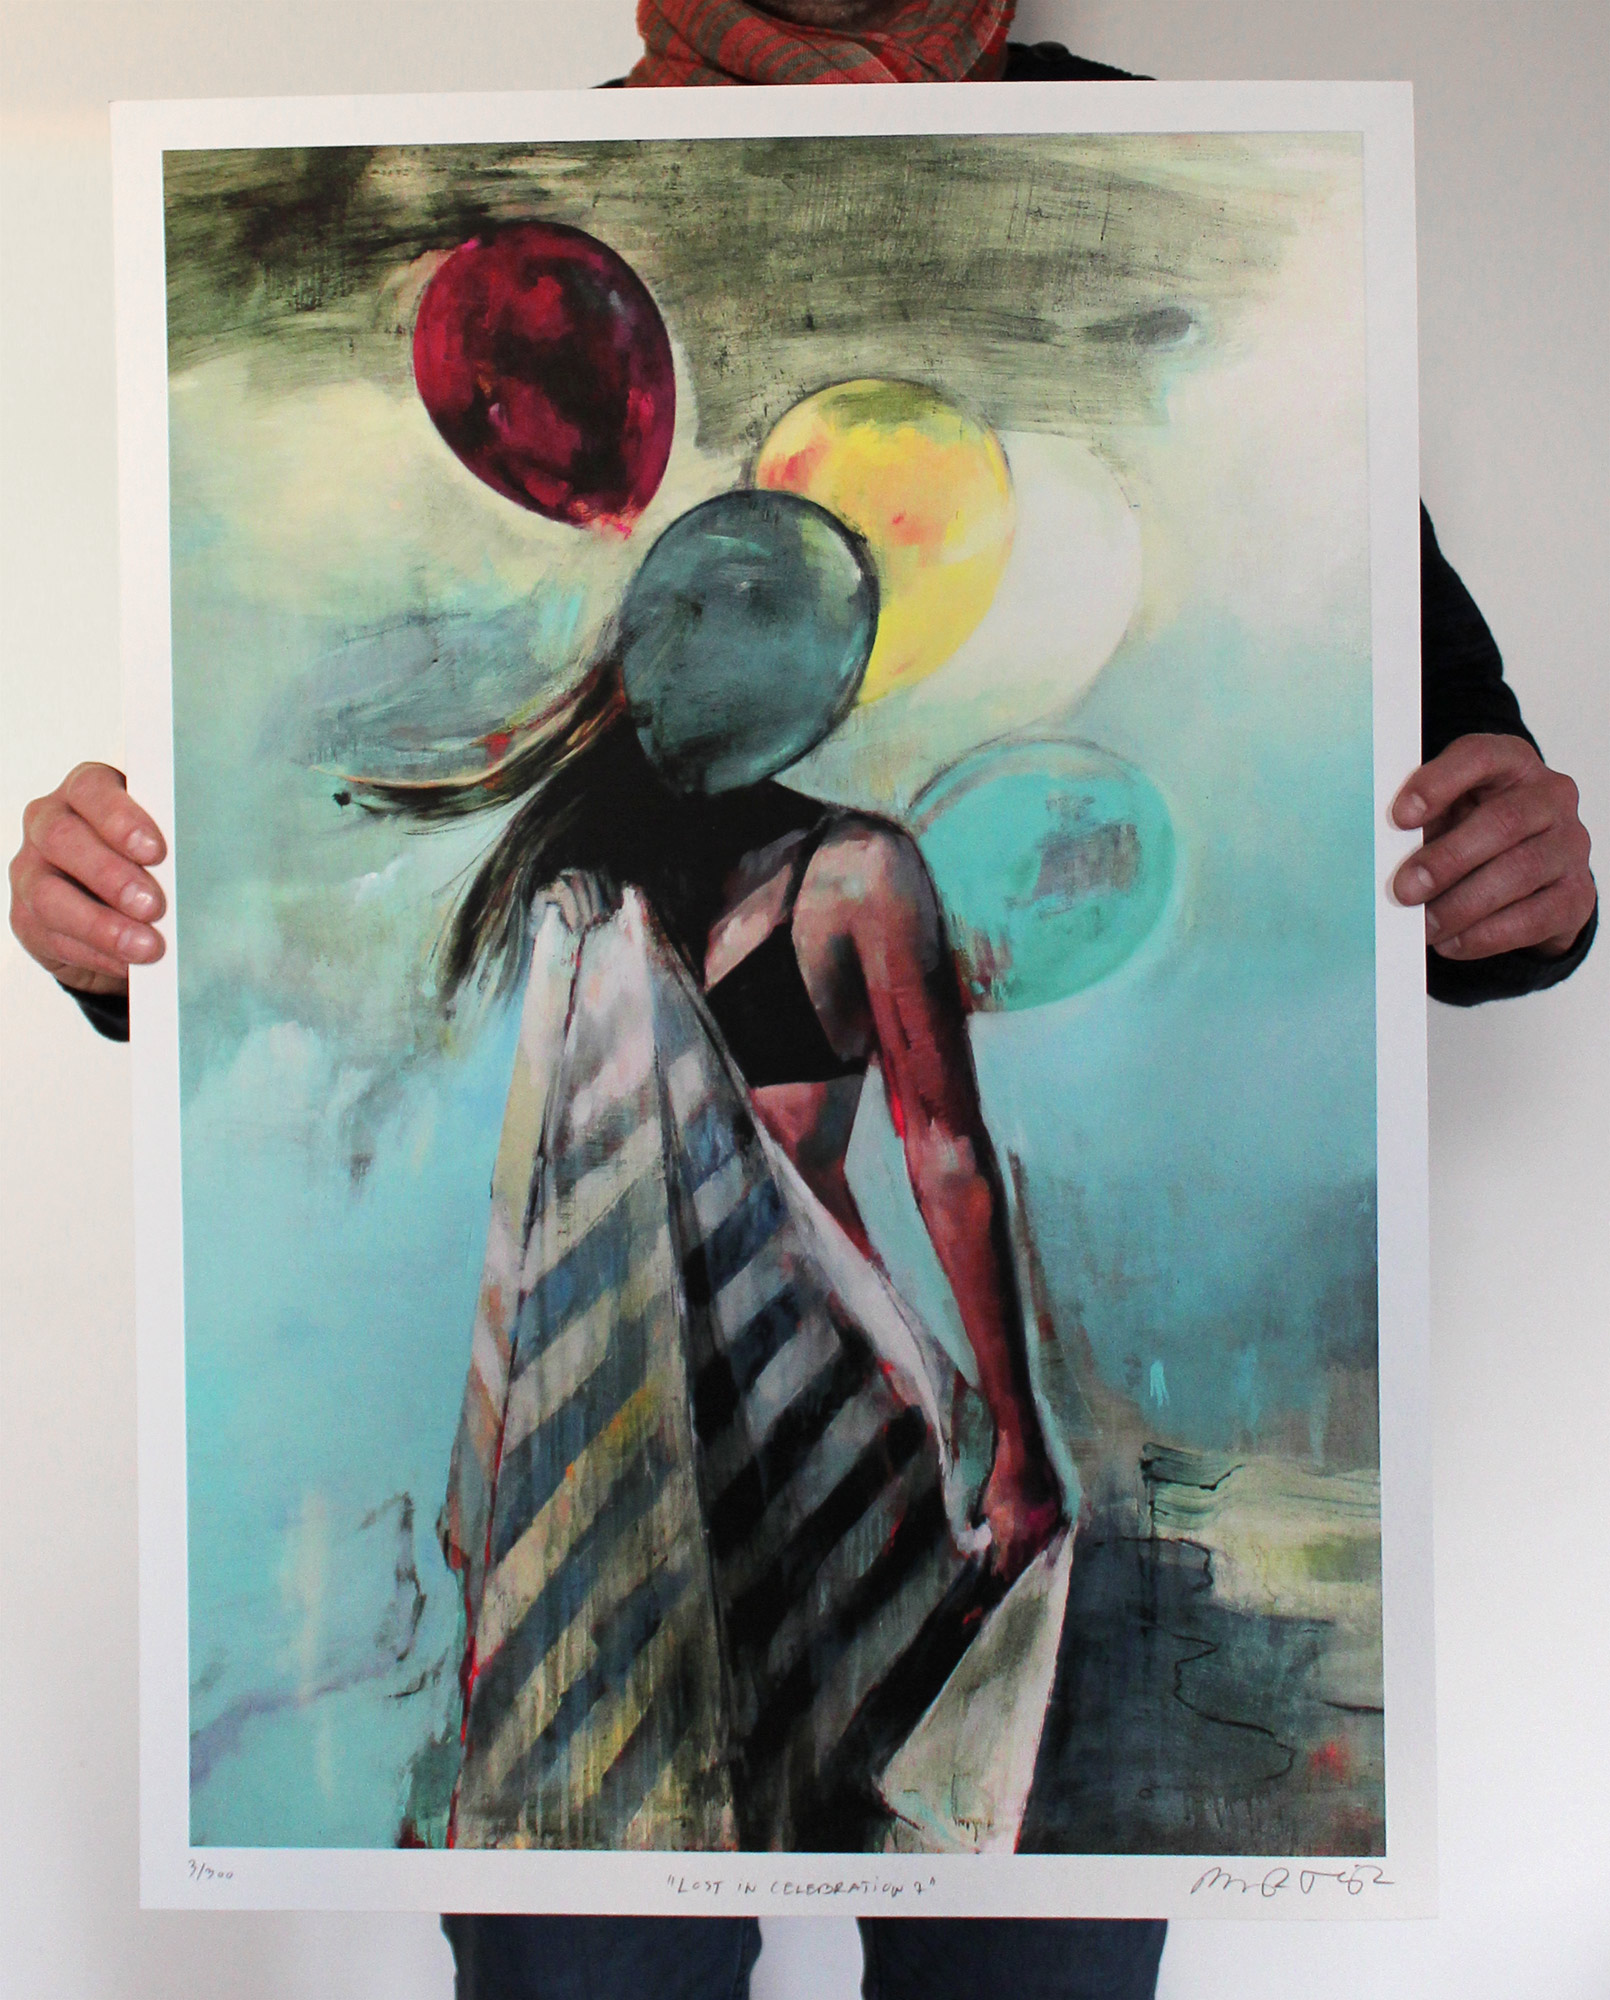 posters-prints, giclee-print, aesthetic, colorful, figurative, graphical, landscape, portraiture, bodies, botany, nature, oceans, people, sky, blue, green, turquoise, yellow, ink, paper, beach, beautiful, contemporary-art, danish, female, flowers, interior, interior-design, modern, modern-art, nordic, posters, pretty, prints, women, Buy original high quality art. Paintings, drawings, limited edition prints & posters by talented artists.